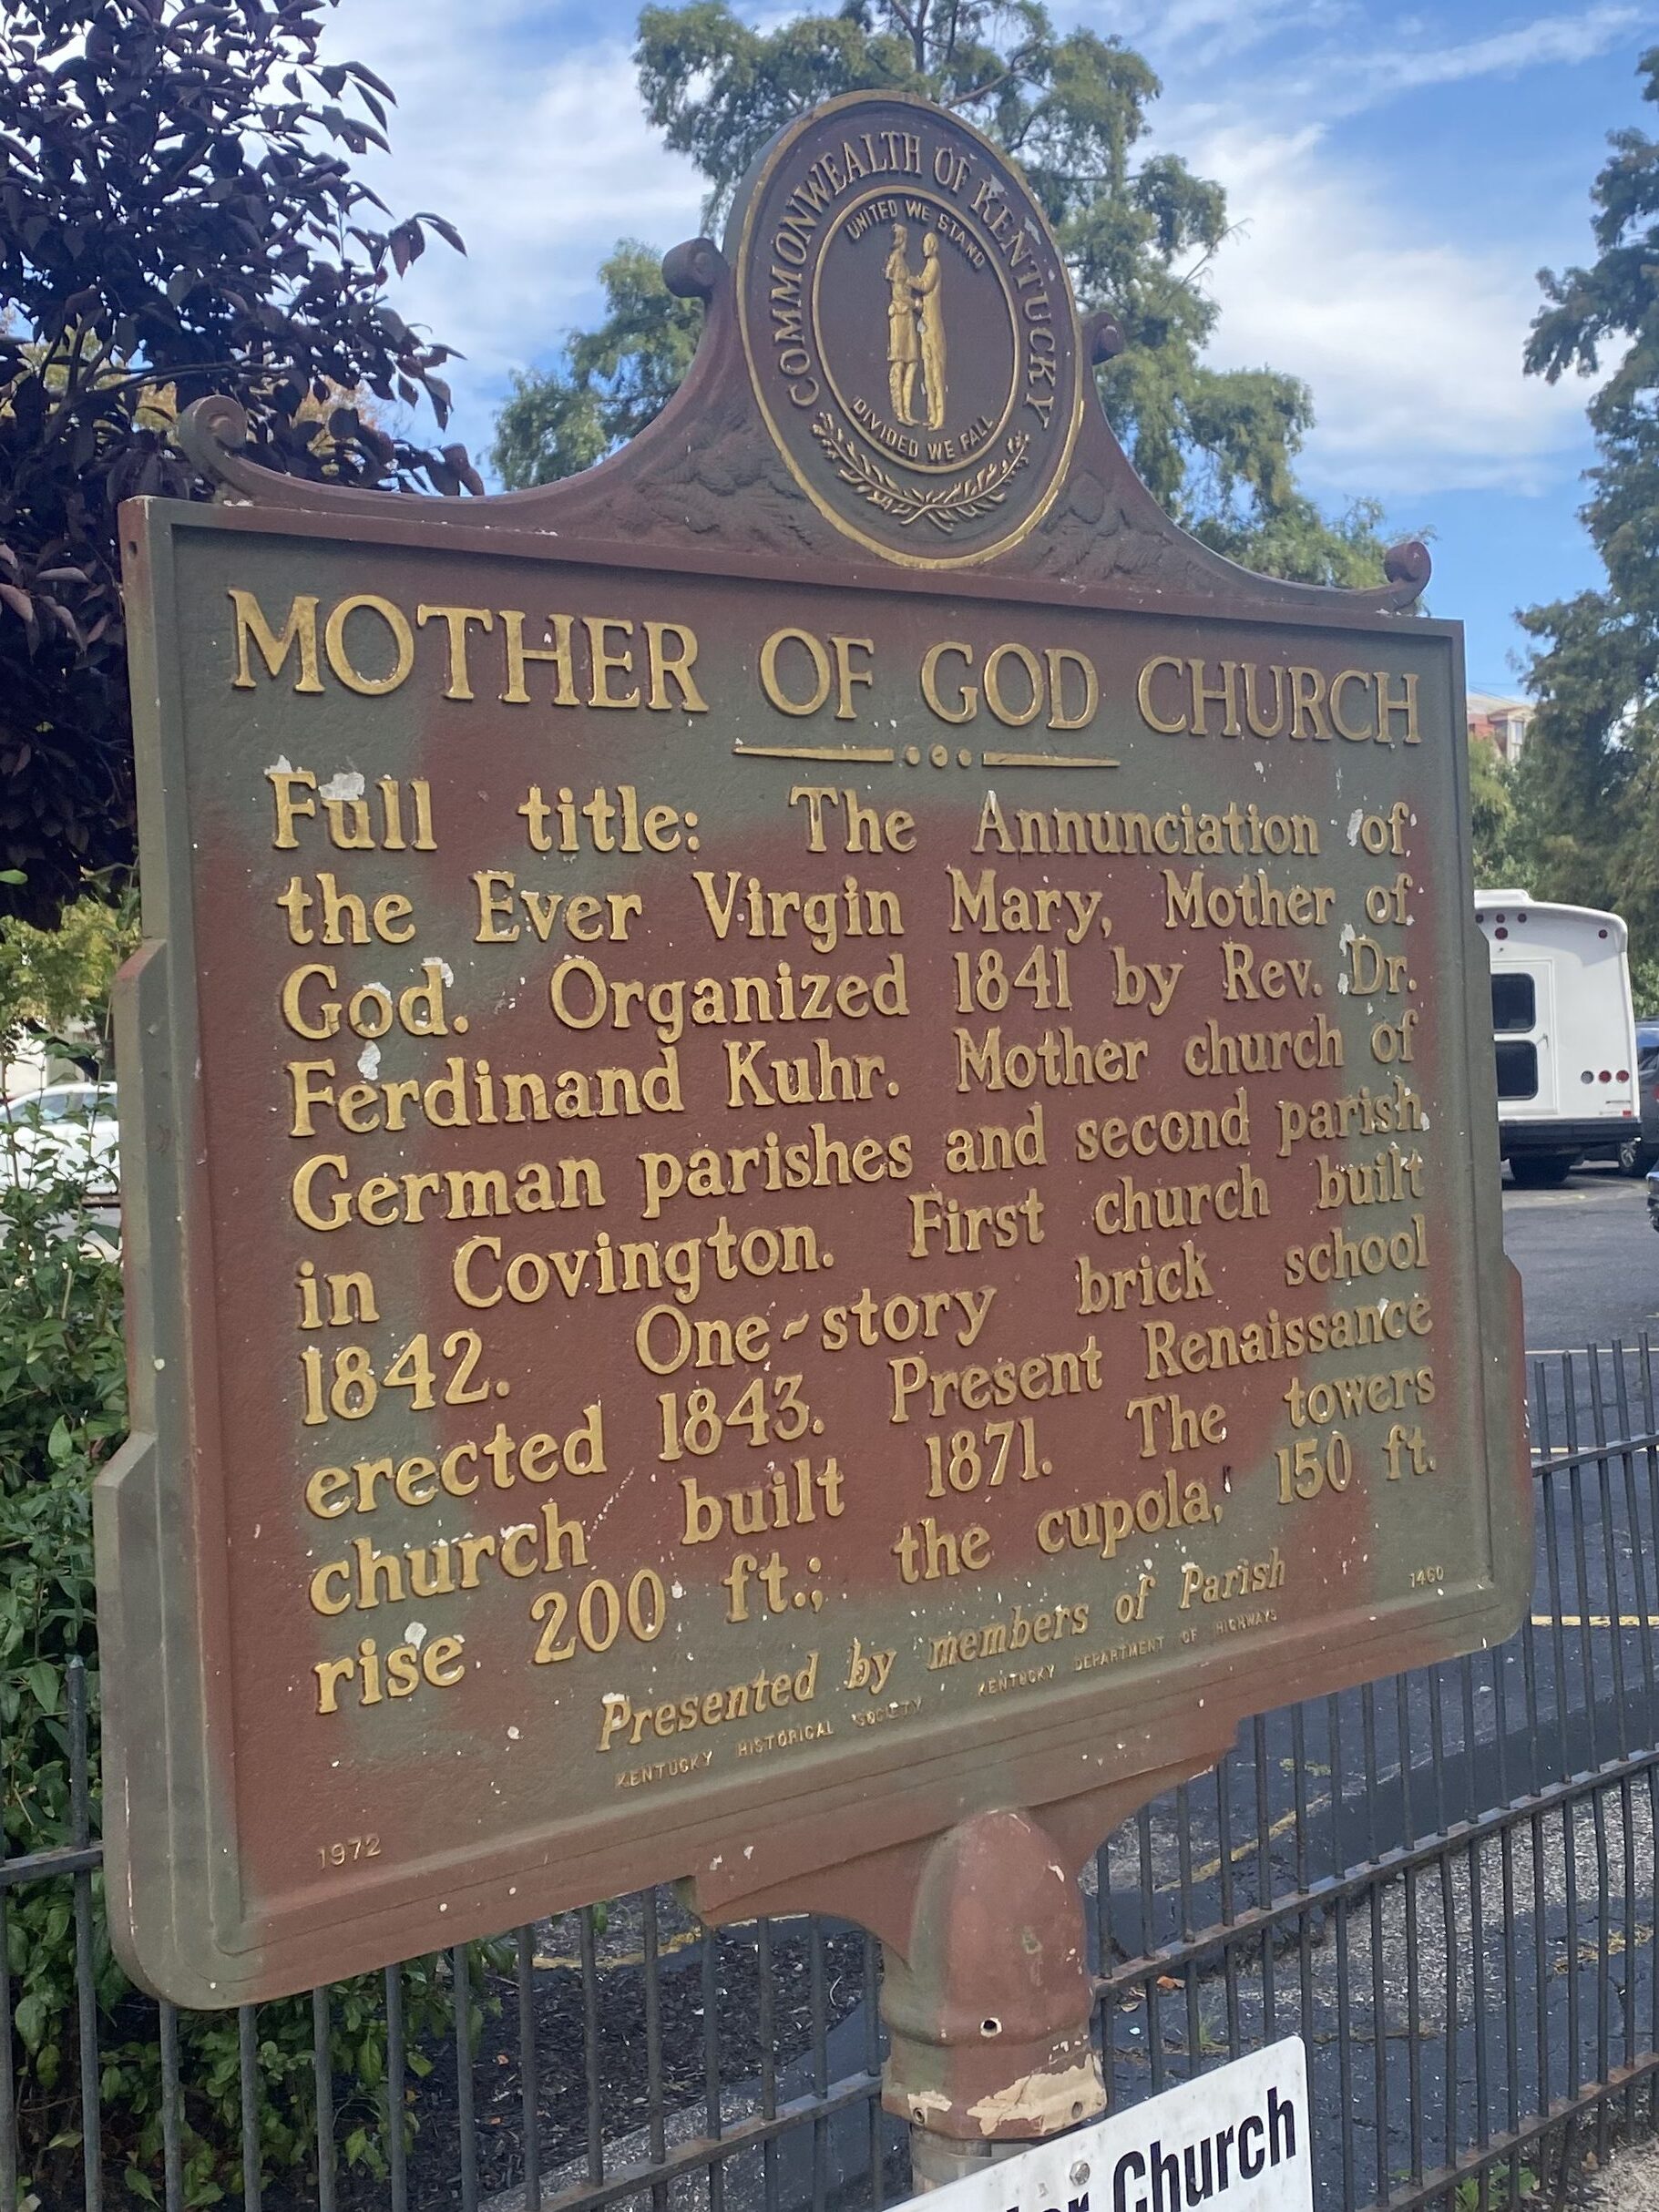 Sign with title "Mother of God Church" and text reading "Full title: The Annunciation of the Ever Virgin Mary, Mother of God. Organized 1841 by Rev. Dr. Ferdinand Kuhr, Mother church of German parishes and second parish in Covington. First church built 1842. One-story brick school erected in 1843. Present Renaissance church built 1871. The towers rise 200 ft.; the cupola 150 ft."